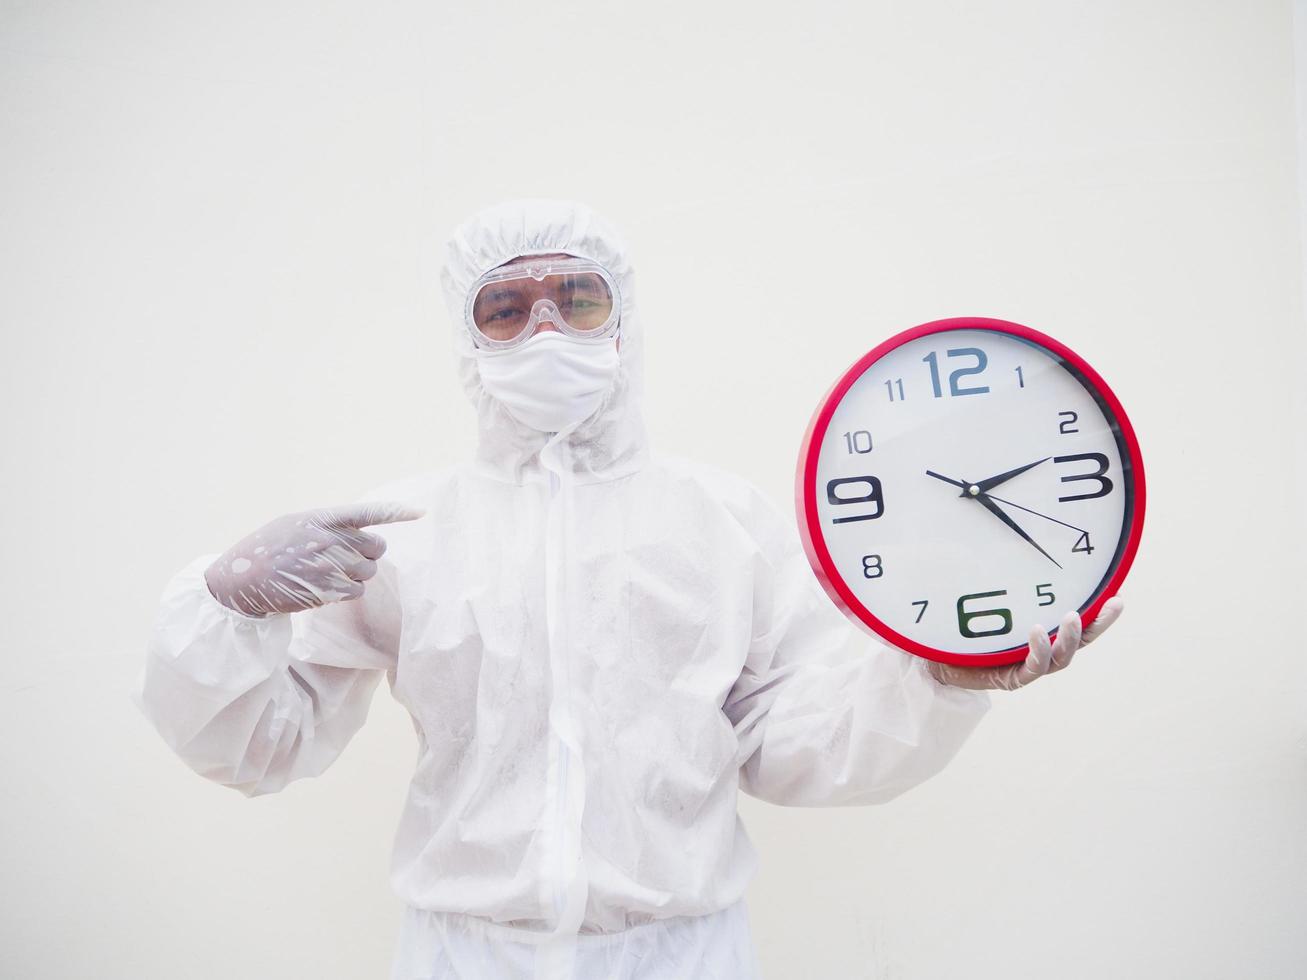 Portrait of doctor or scientist in PPE suite uniform holding red alarm clock and looking at the camera In various gestures. COVID-19 concept isolated white background photo